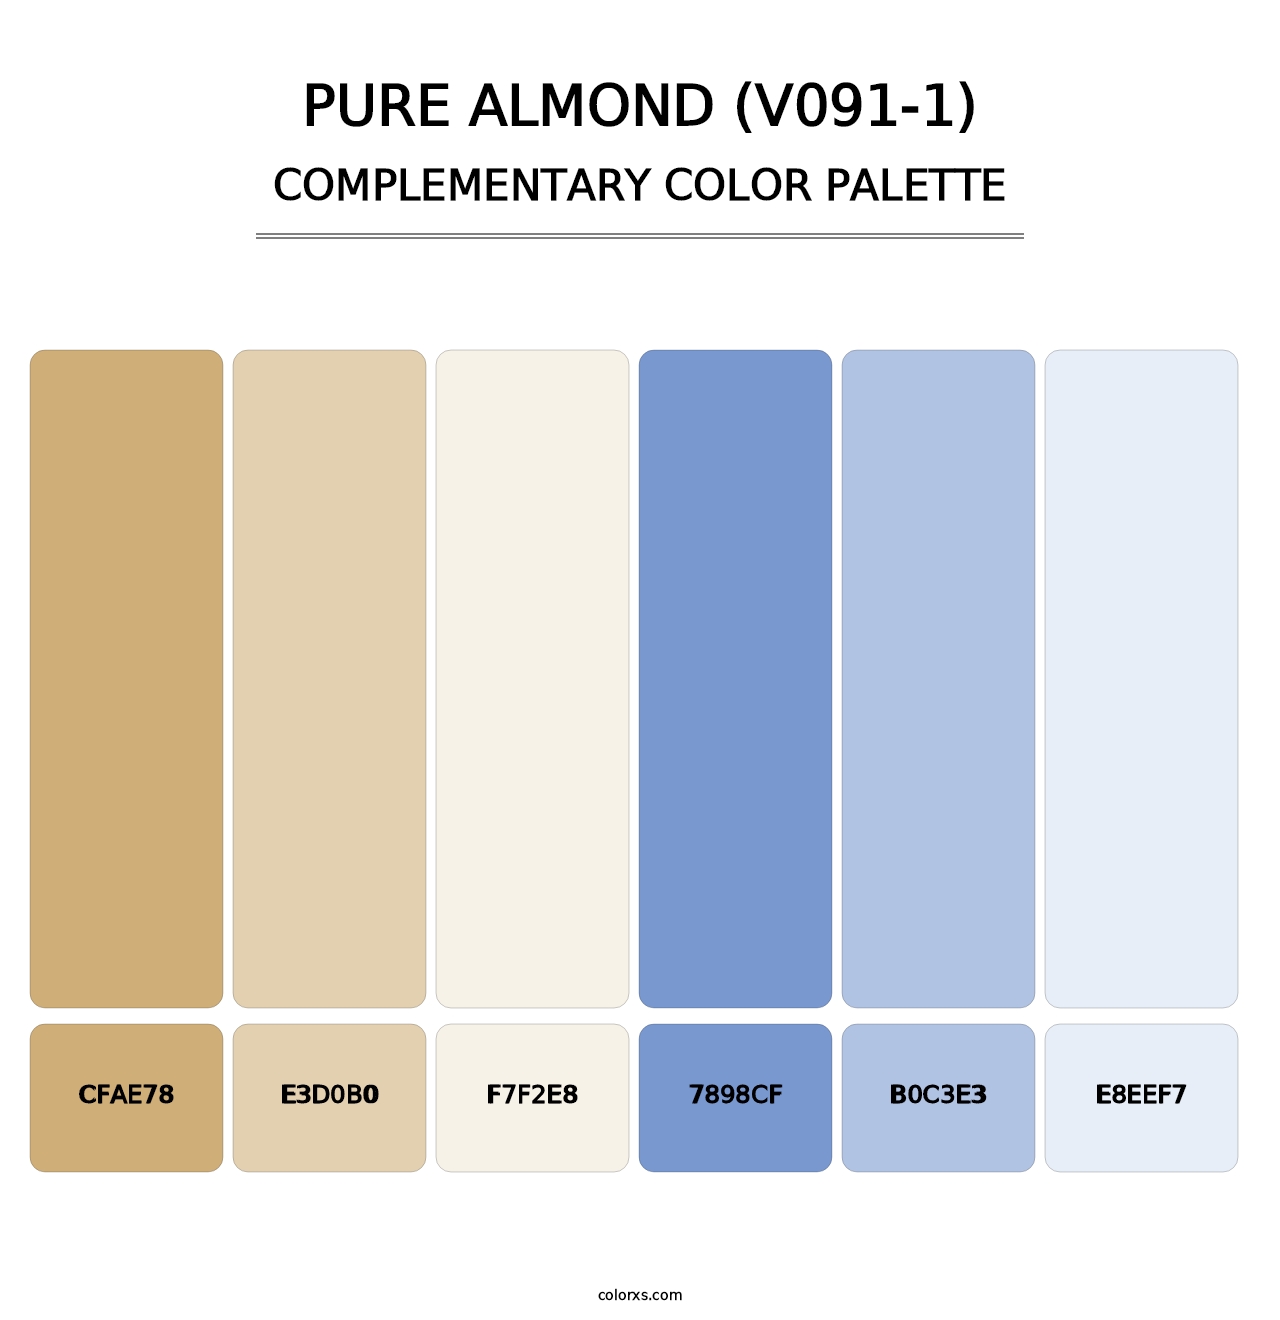 Pure Almond (V091-1) - Complementary Color Palette